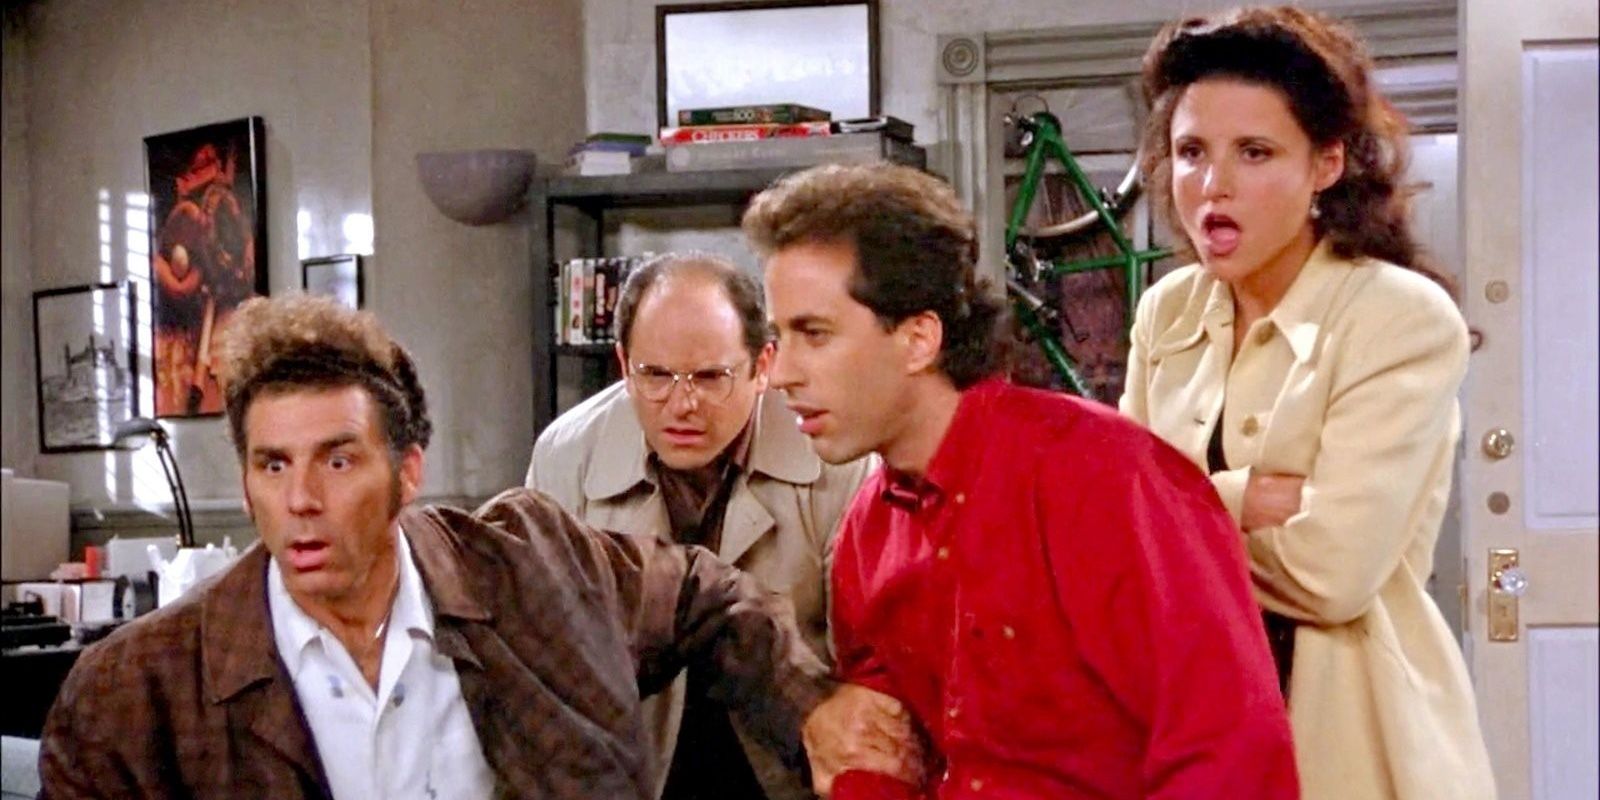 Seinfeld The Bet - characters looking at TV